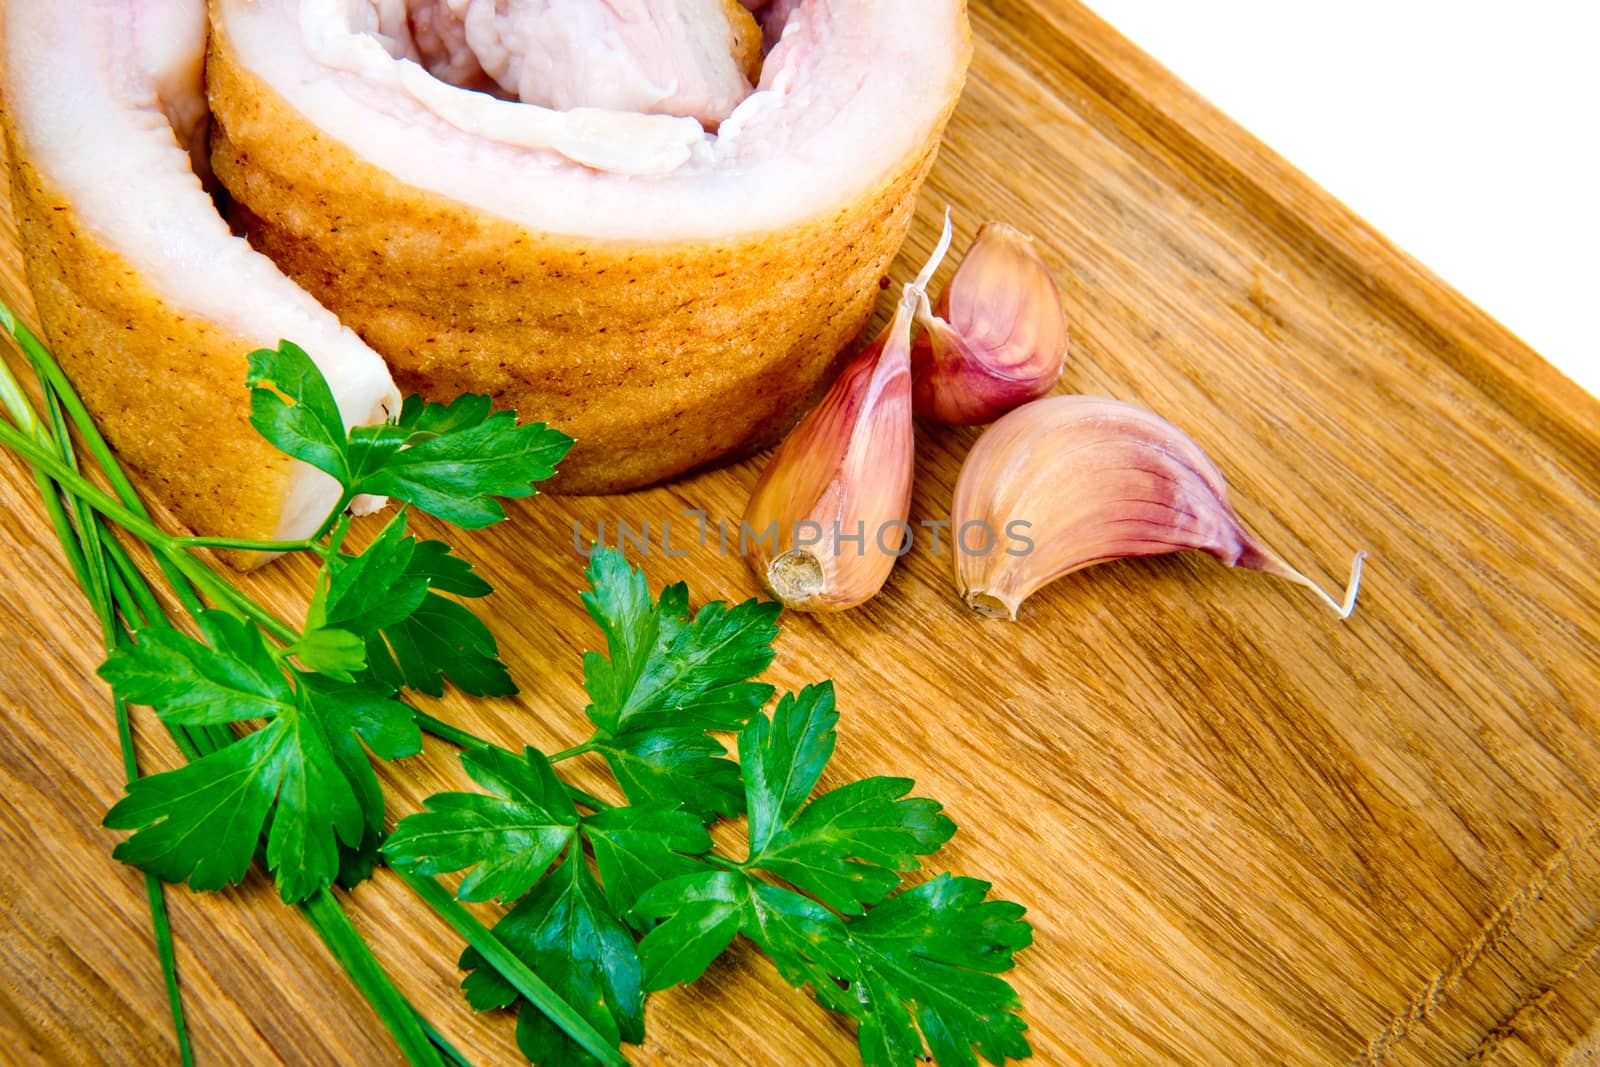 Pork belly with garlic and parsley on wooden board isolated on a white background.